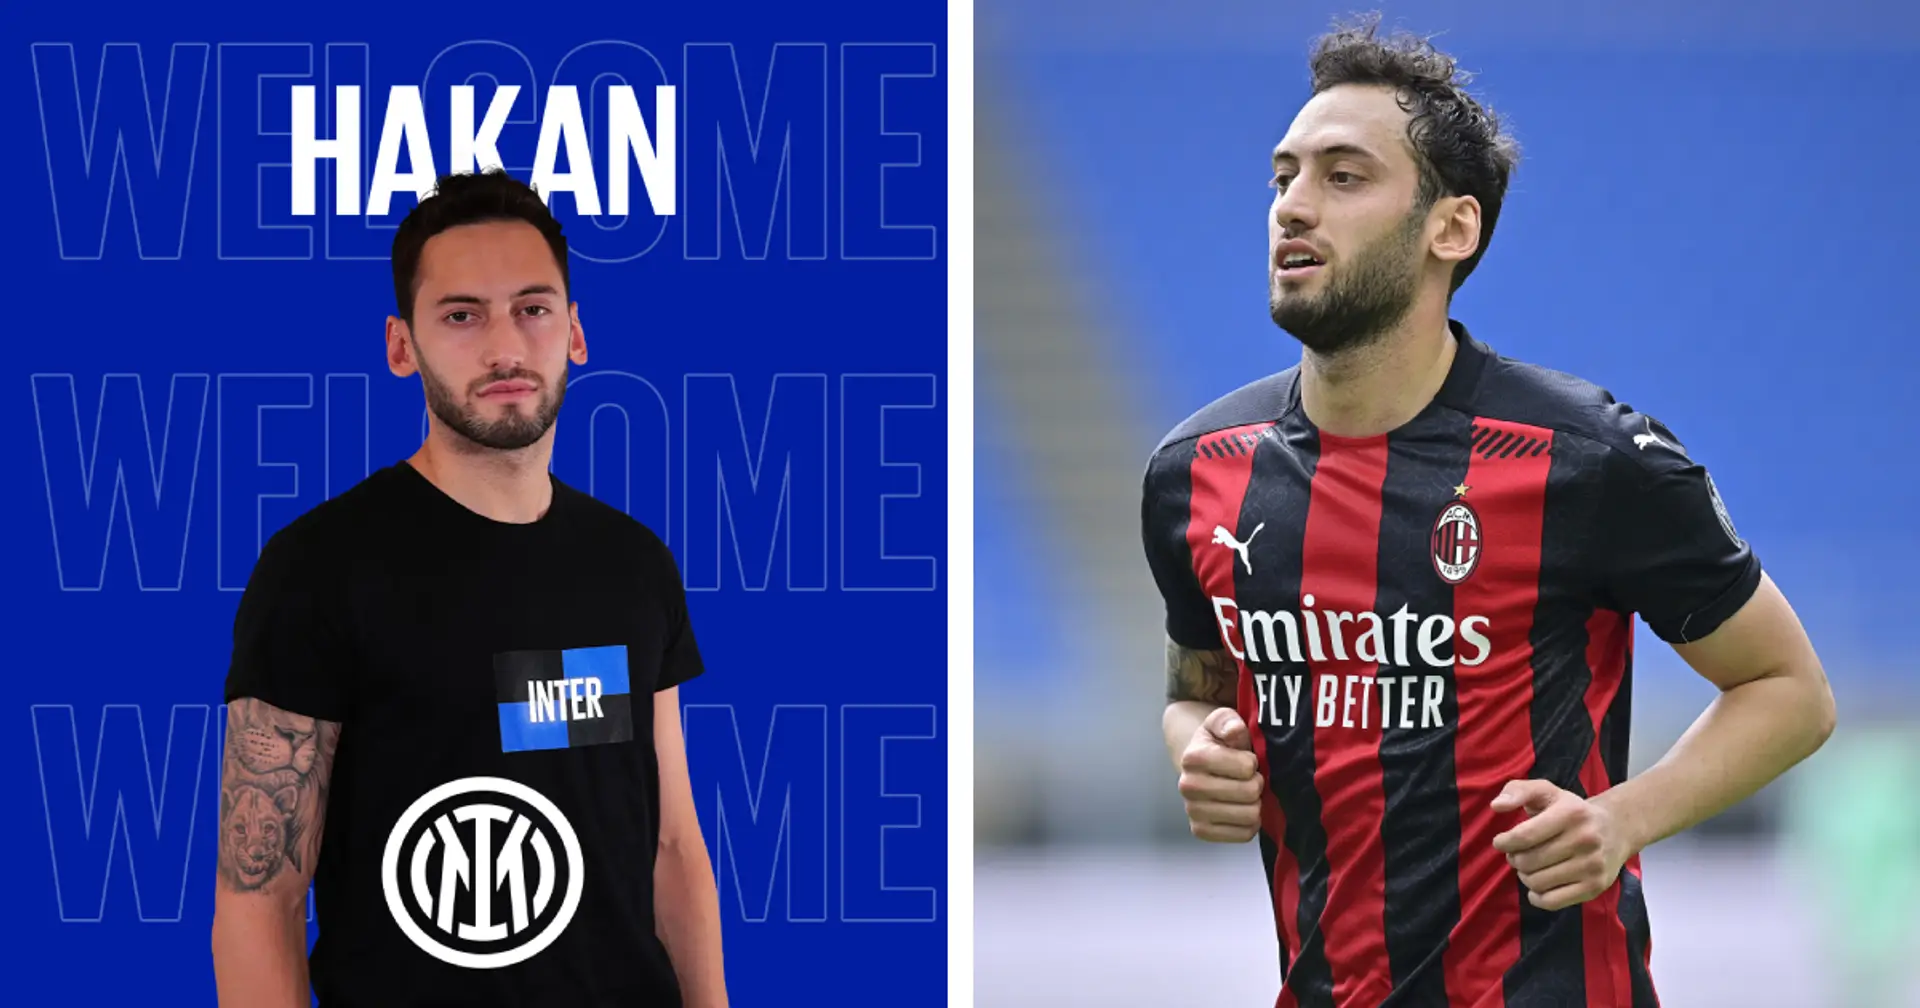 OFFICIAL: Hakan Calhanoglu joins AC Milan from Inter Milan on a free transfer